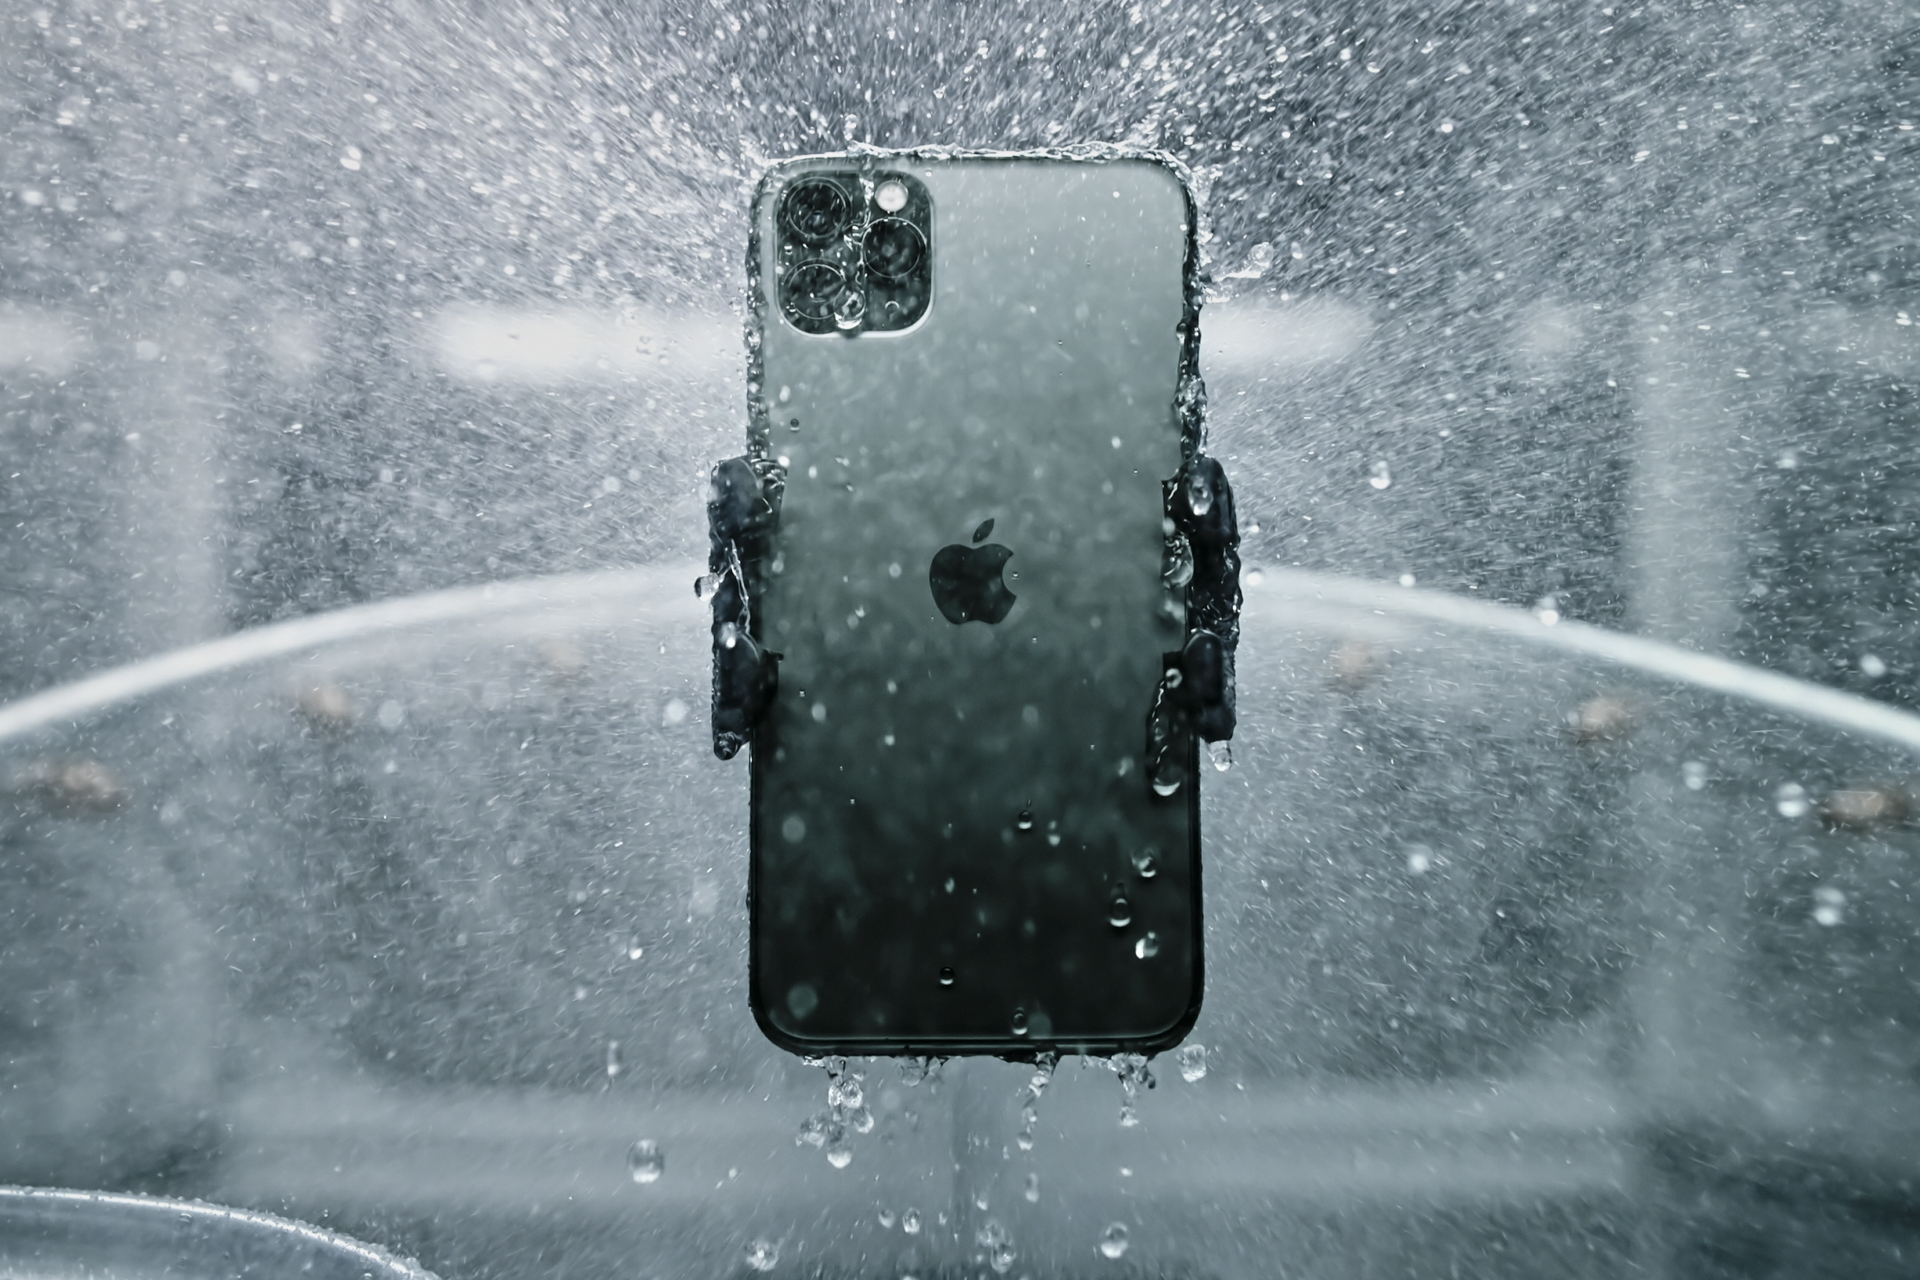 Apple iPhone 11 Pro and Pro Max hero shot soaked it water | Apple September 2019 Event Keynote